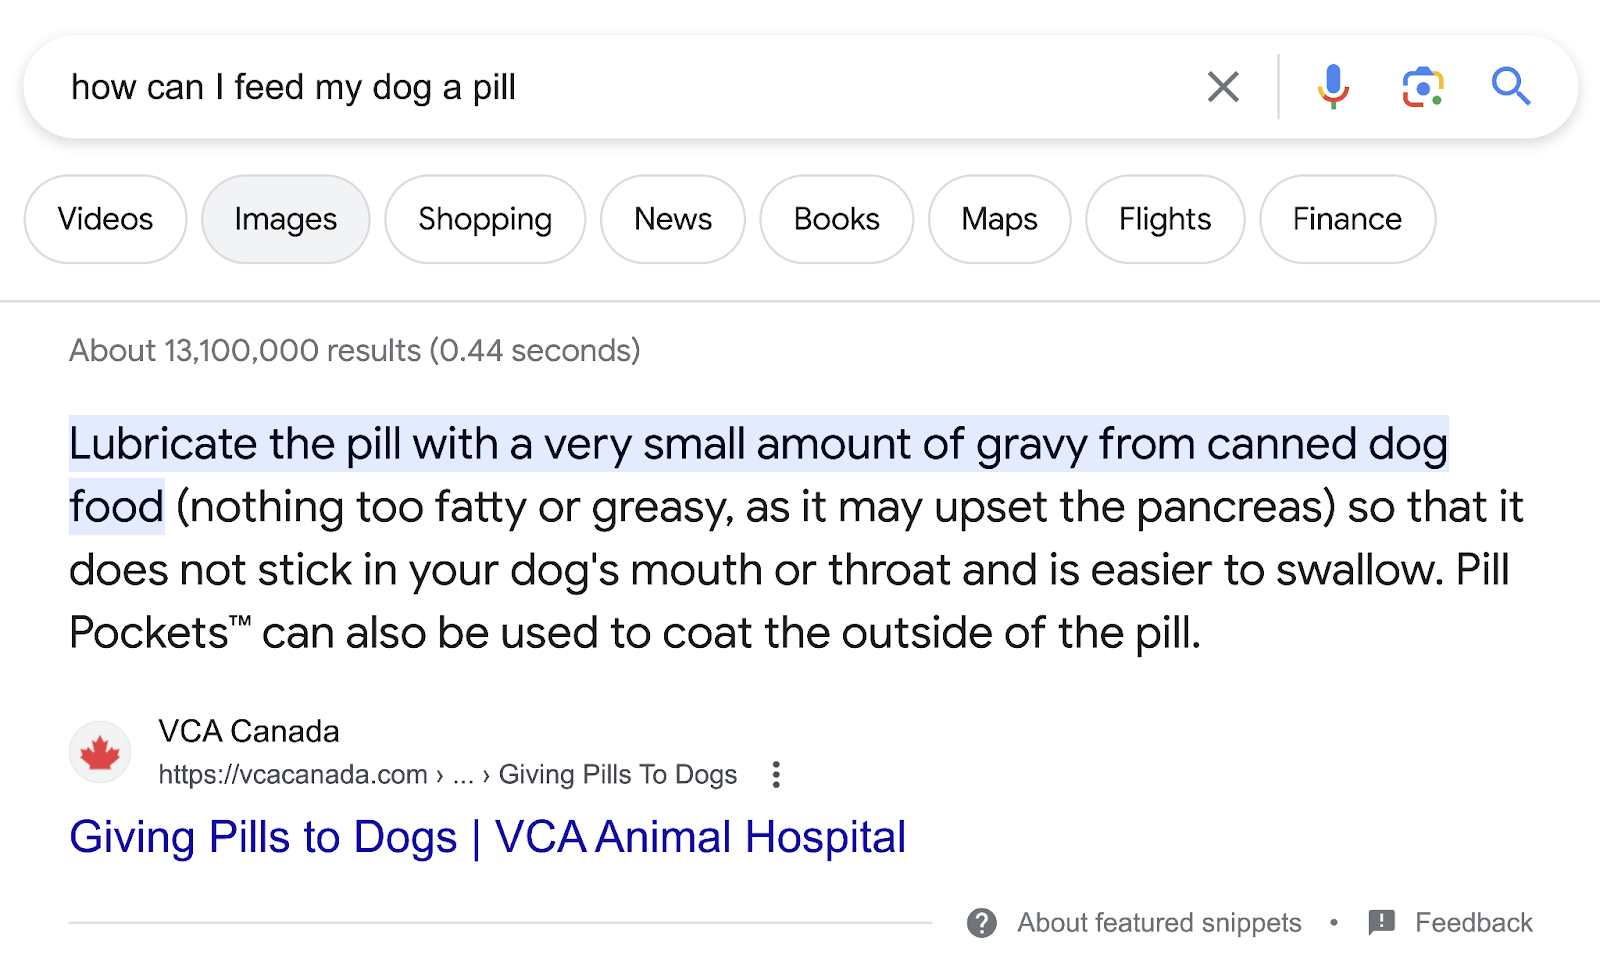 first results on Google for “How can I feed my dog a pill?” query shows a page from VCA Animal Hospital on “Giving Pills to Dogs”